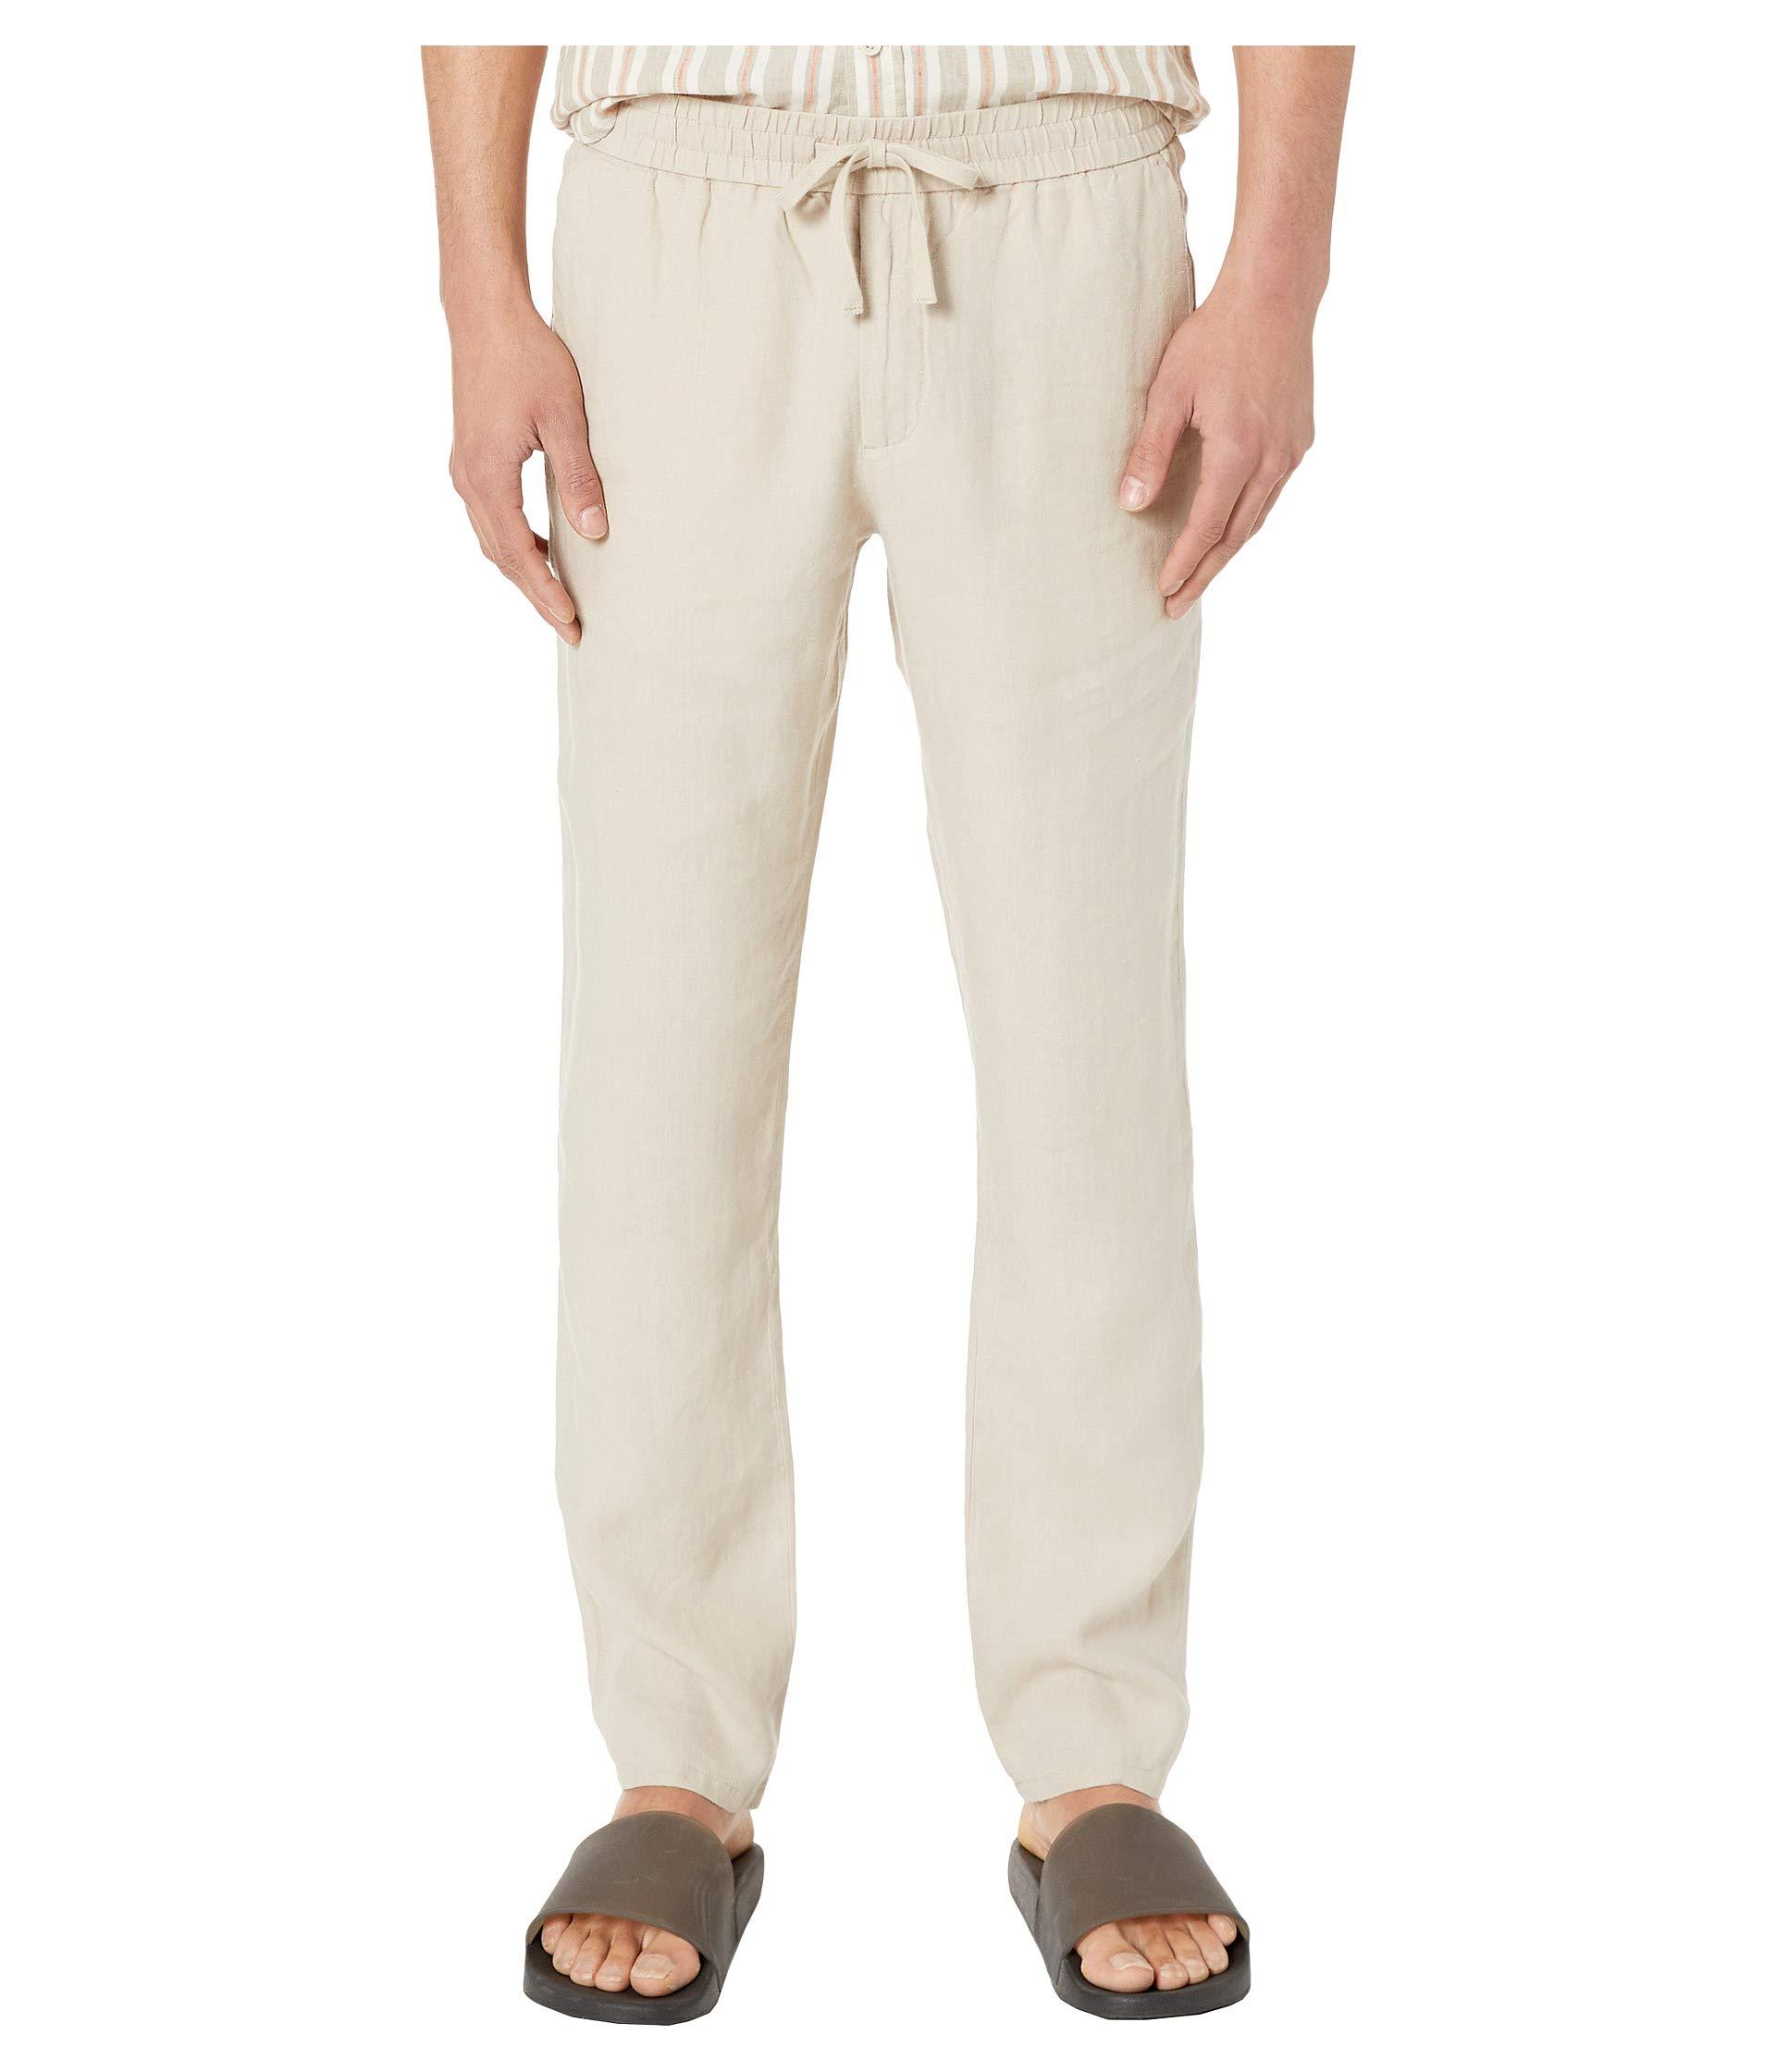 Vince Draw String Pants in White for Men - Lyst